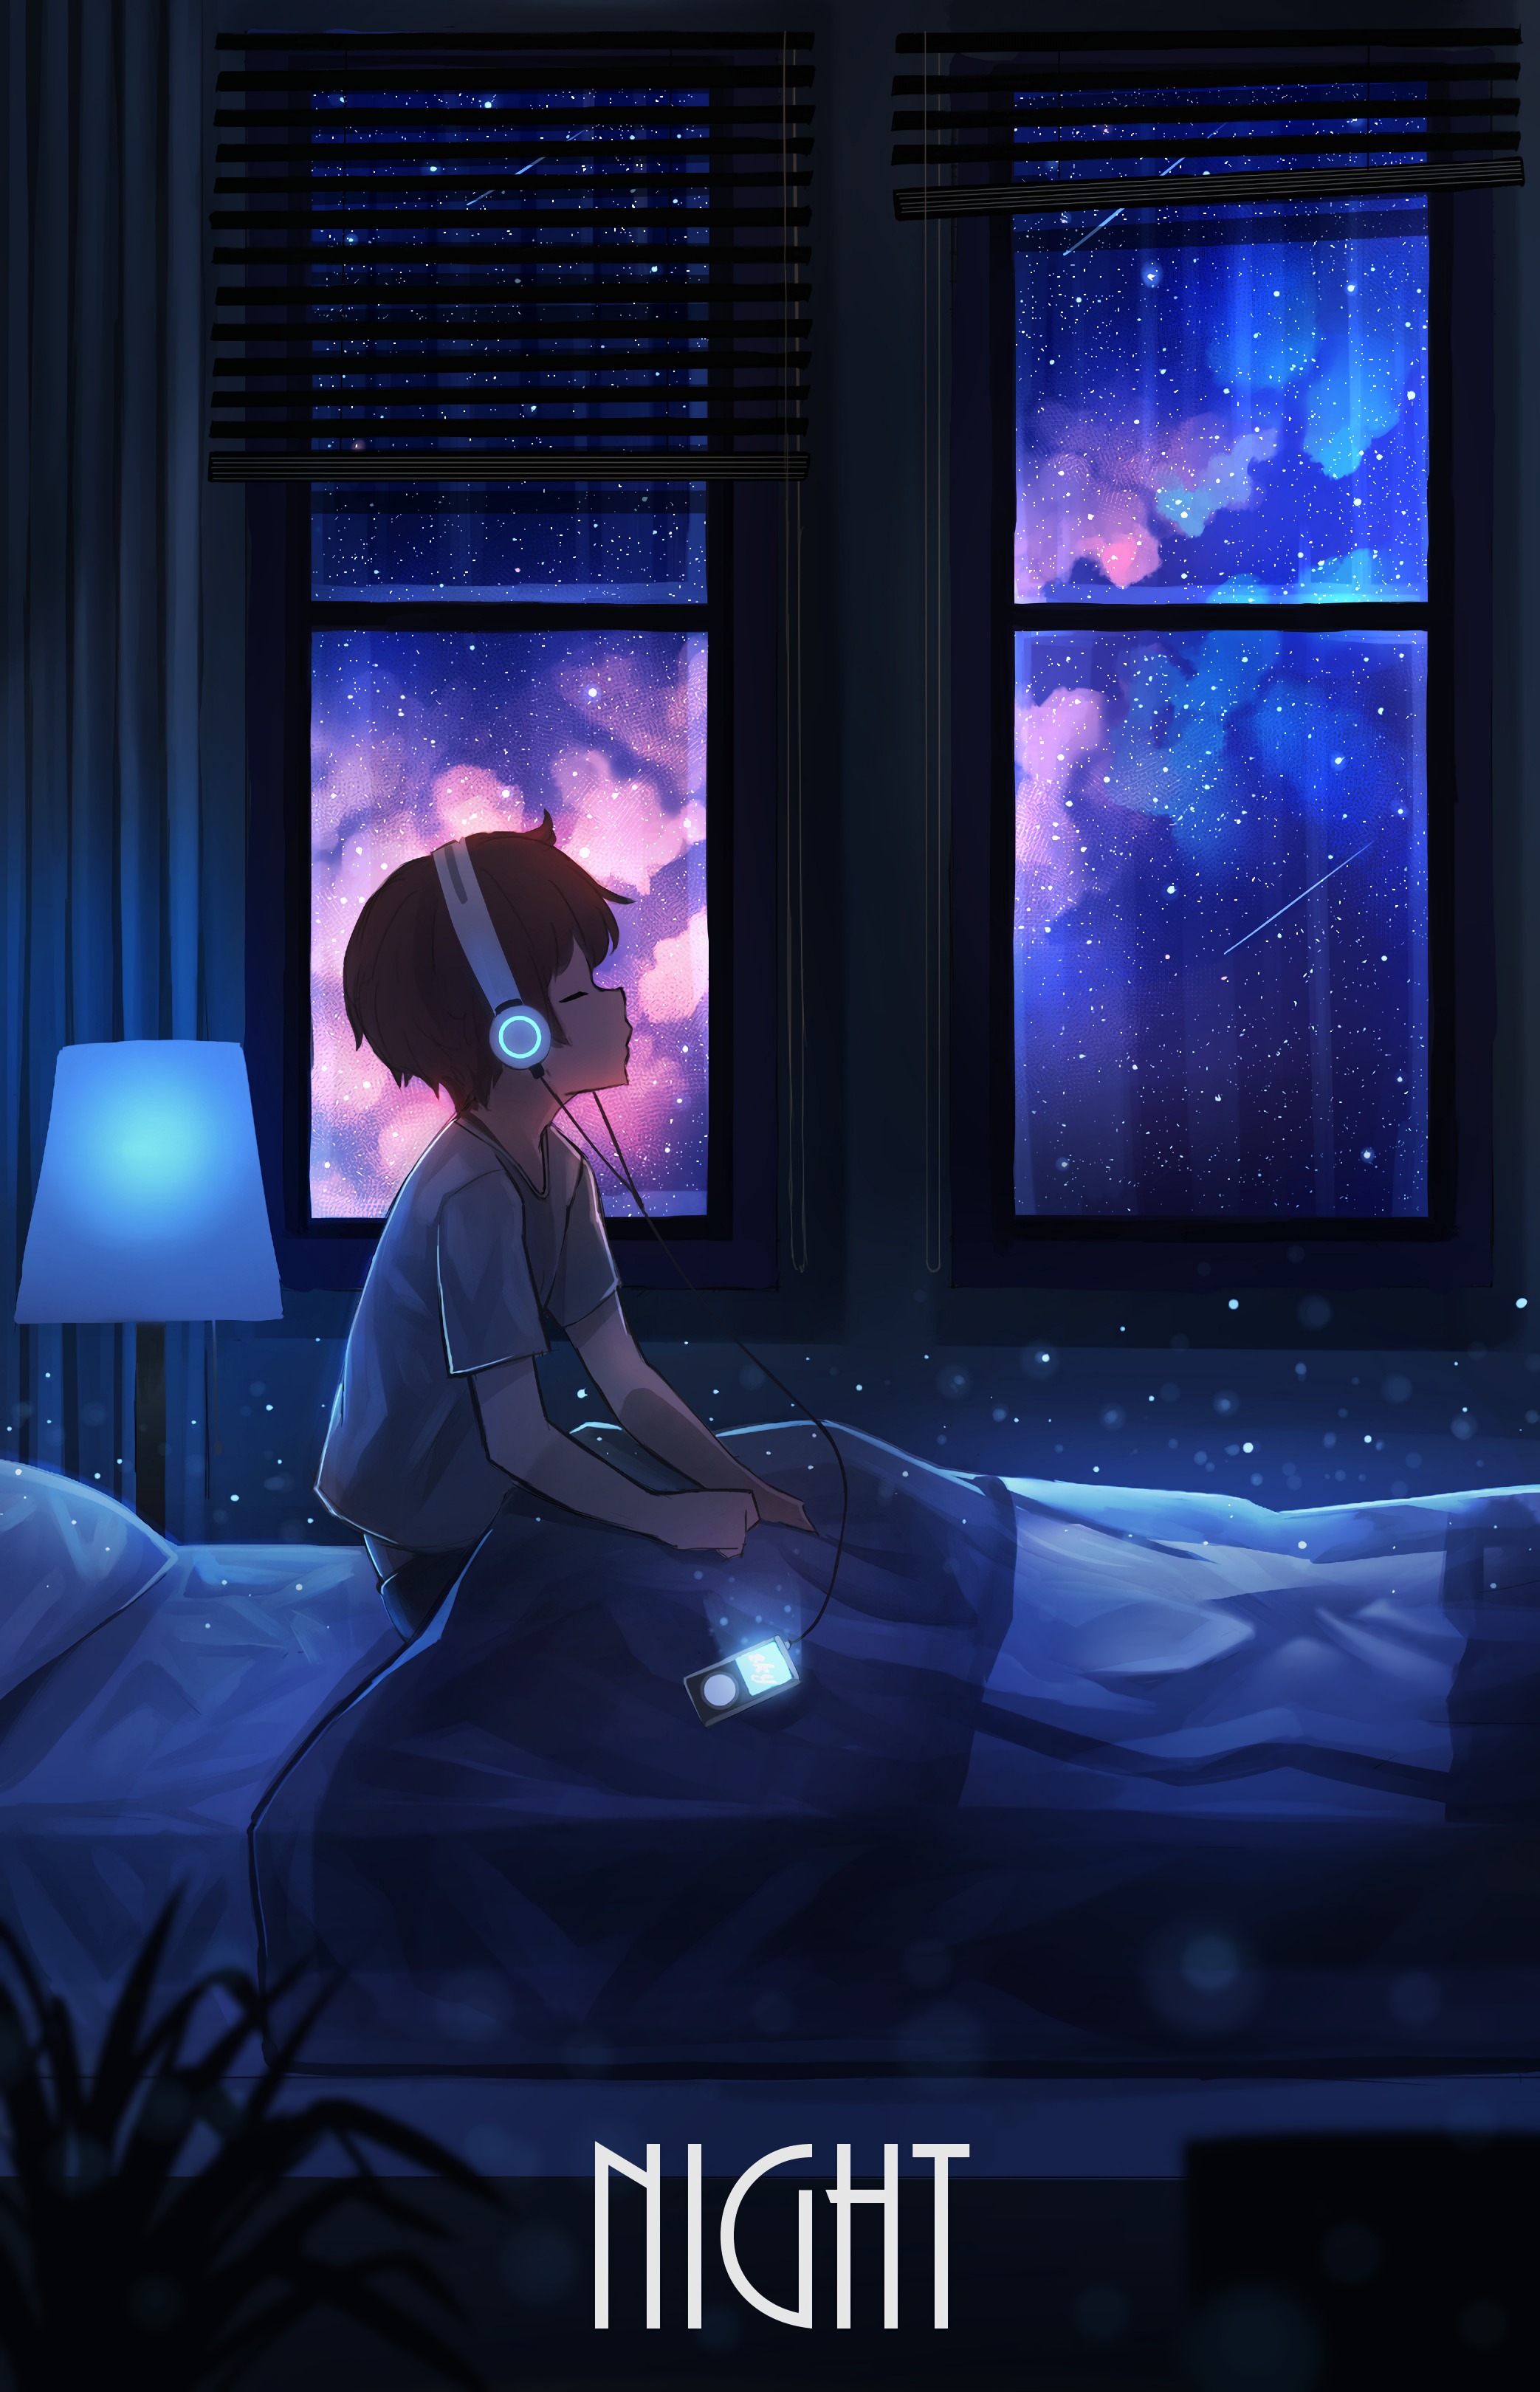 54009 download wallpaper night, headphones, starry sky, art, boy screensavers and pictures for free